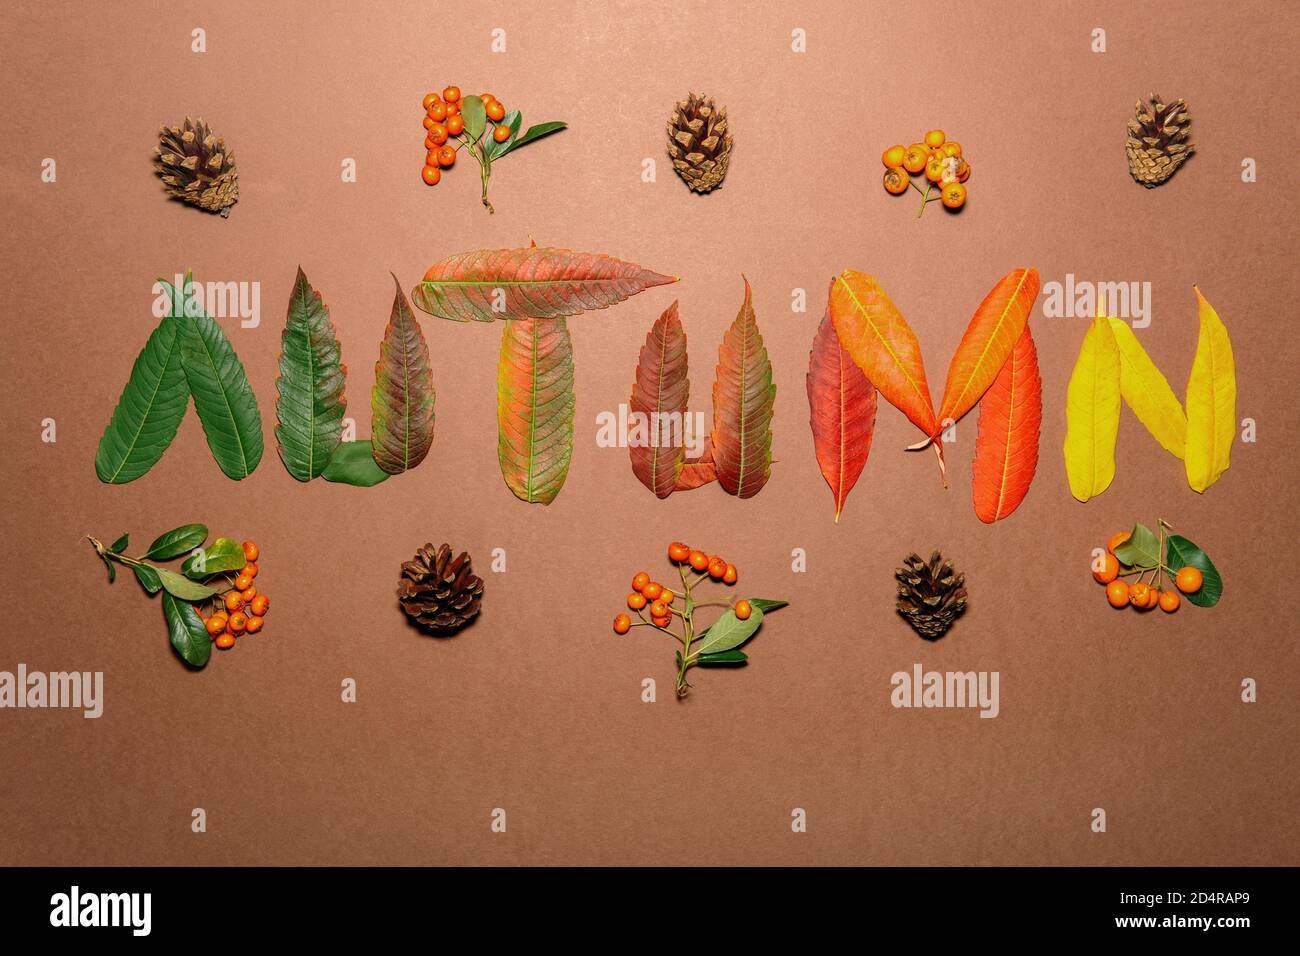 Autumn letters made with autumn leaves Stock Photo